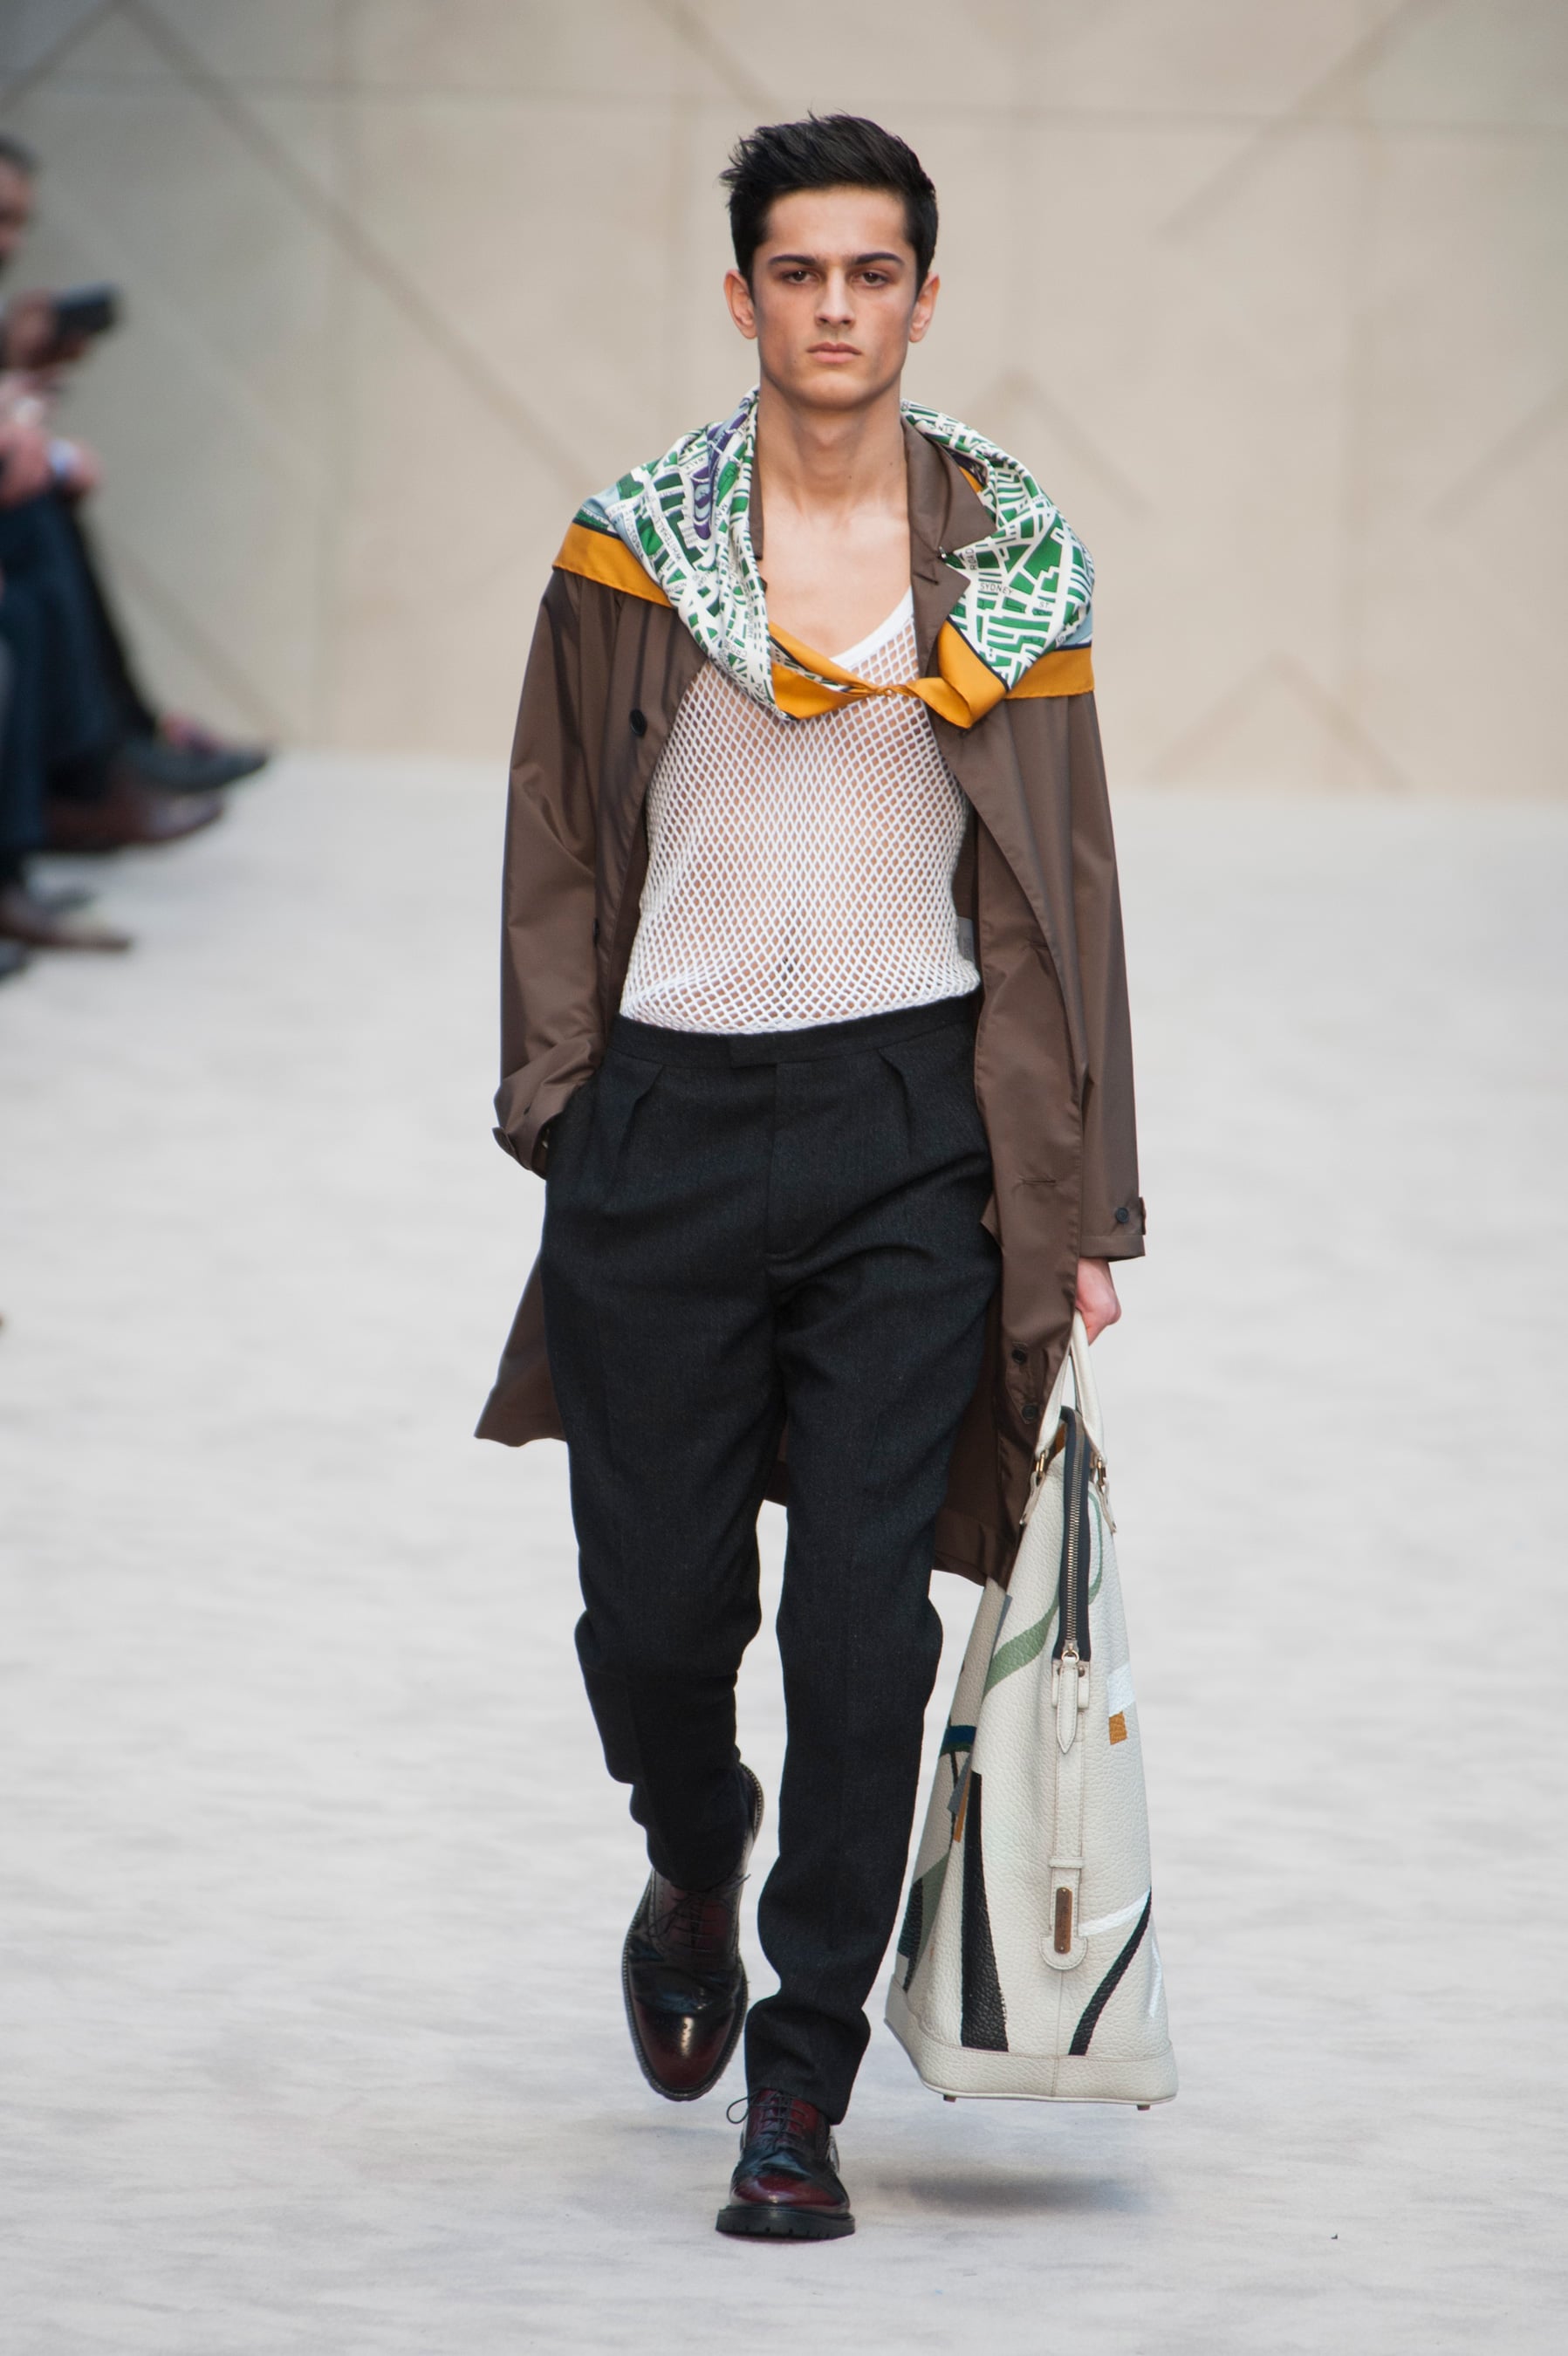 Burberry Men's Fall 2014 Runway Pictures | POPSUGAR Fashion